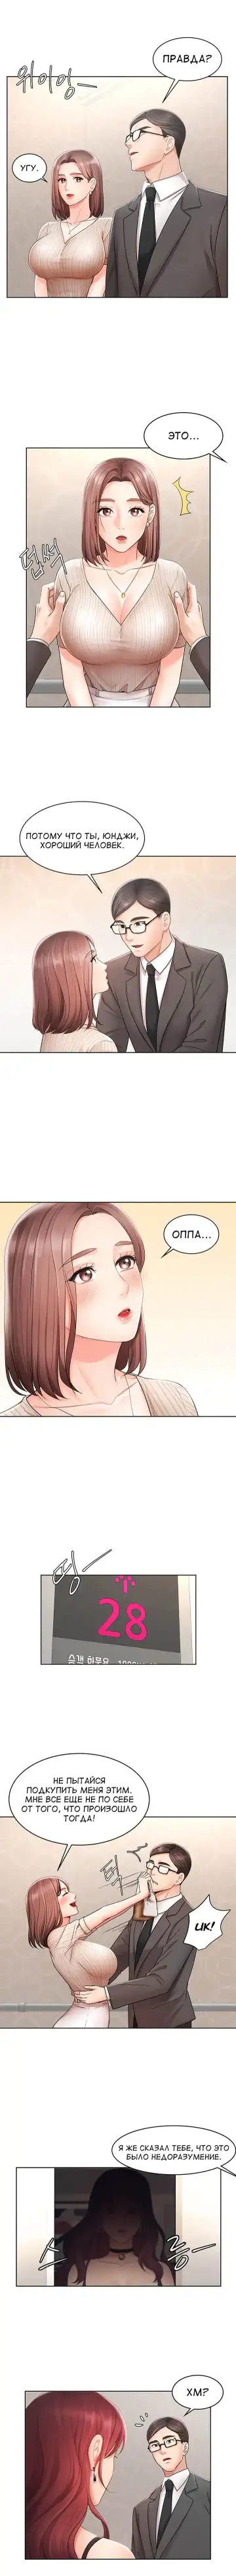 Sold Out Girl | Продажная девушка Fhentai.net - Page 30